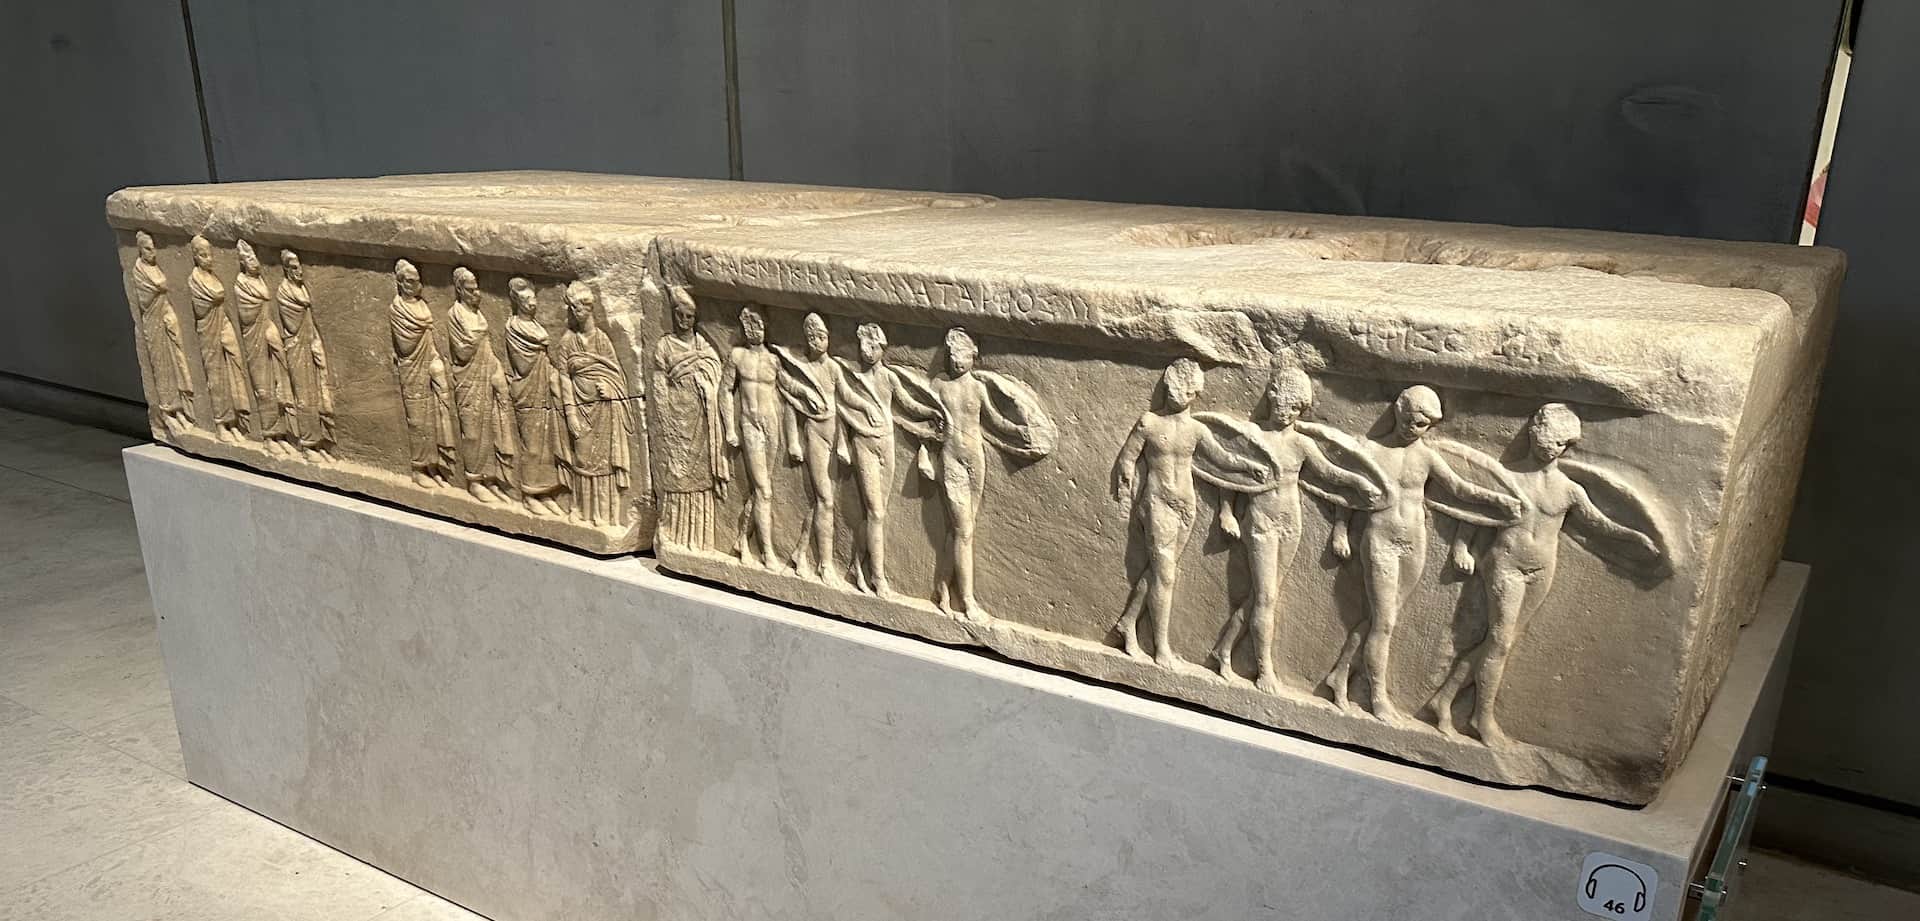 Atarbos Base; 323/2 BC at the Acropolis Museum in Athens, Greece